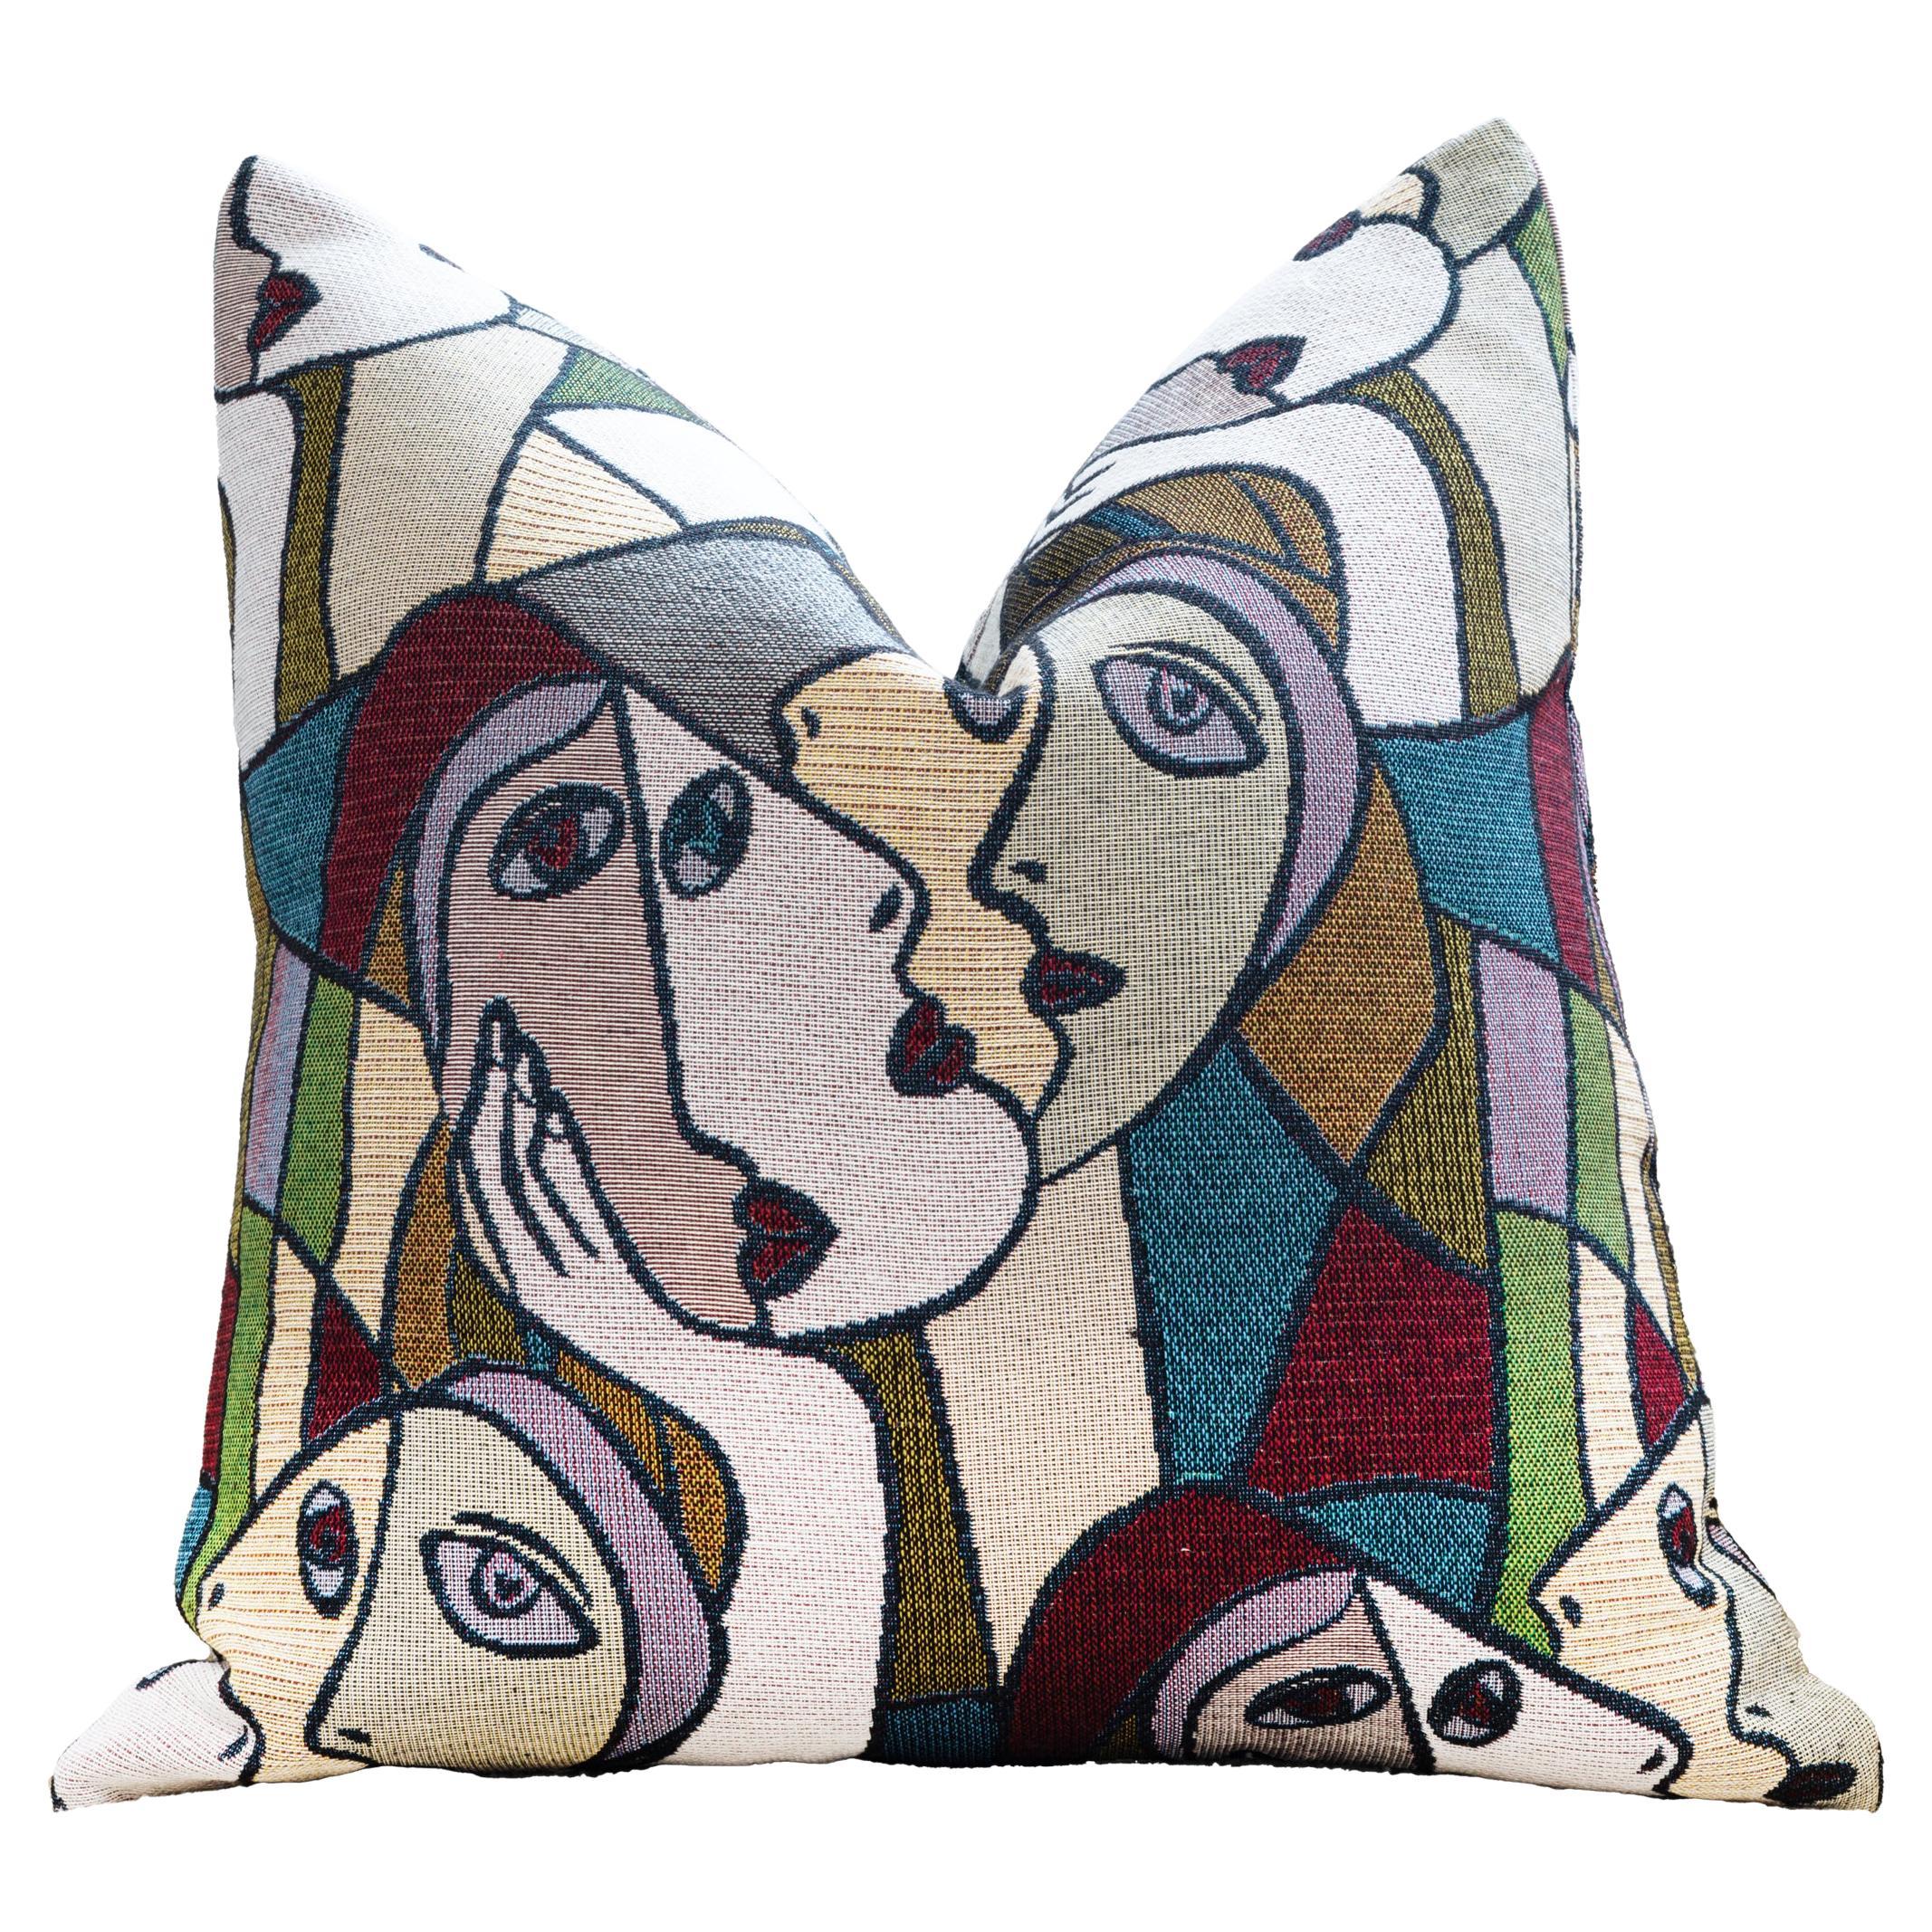 Picasso Inspired Throw Pillows by Nicholas Wolfe For Sale